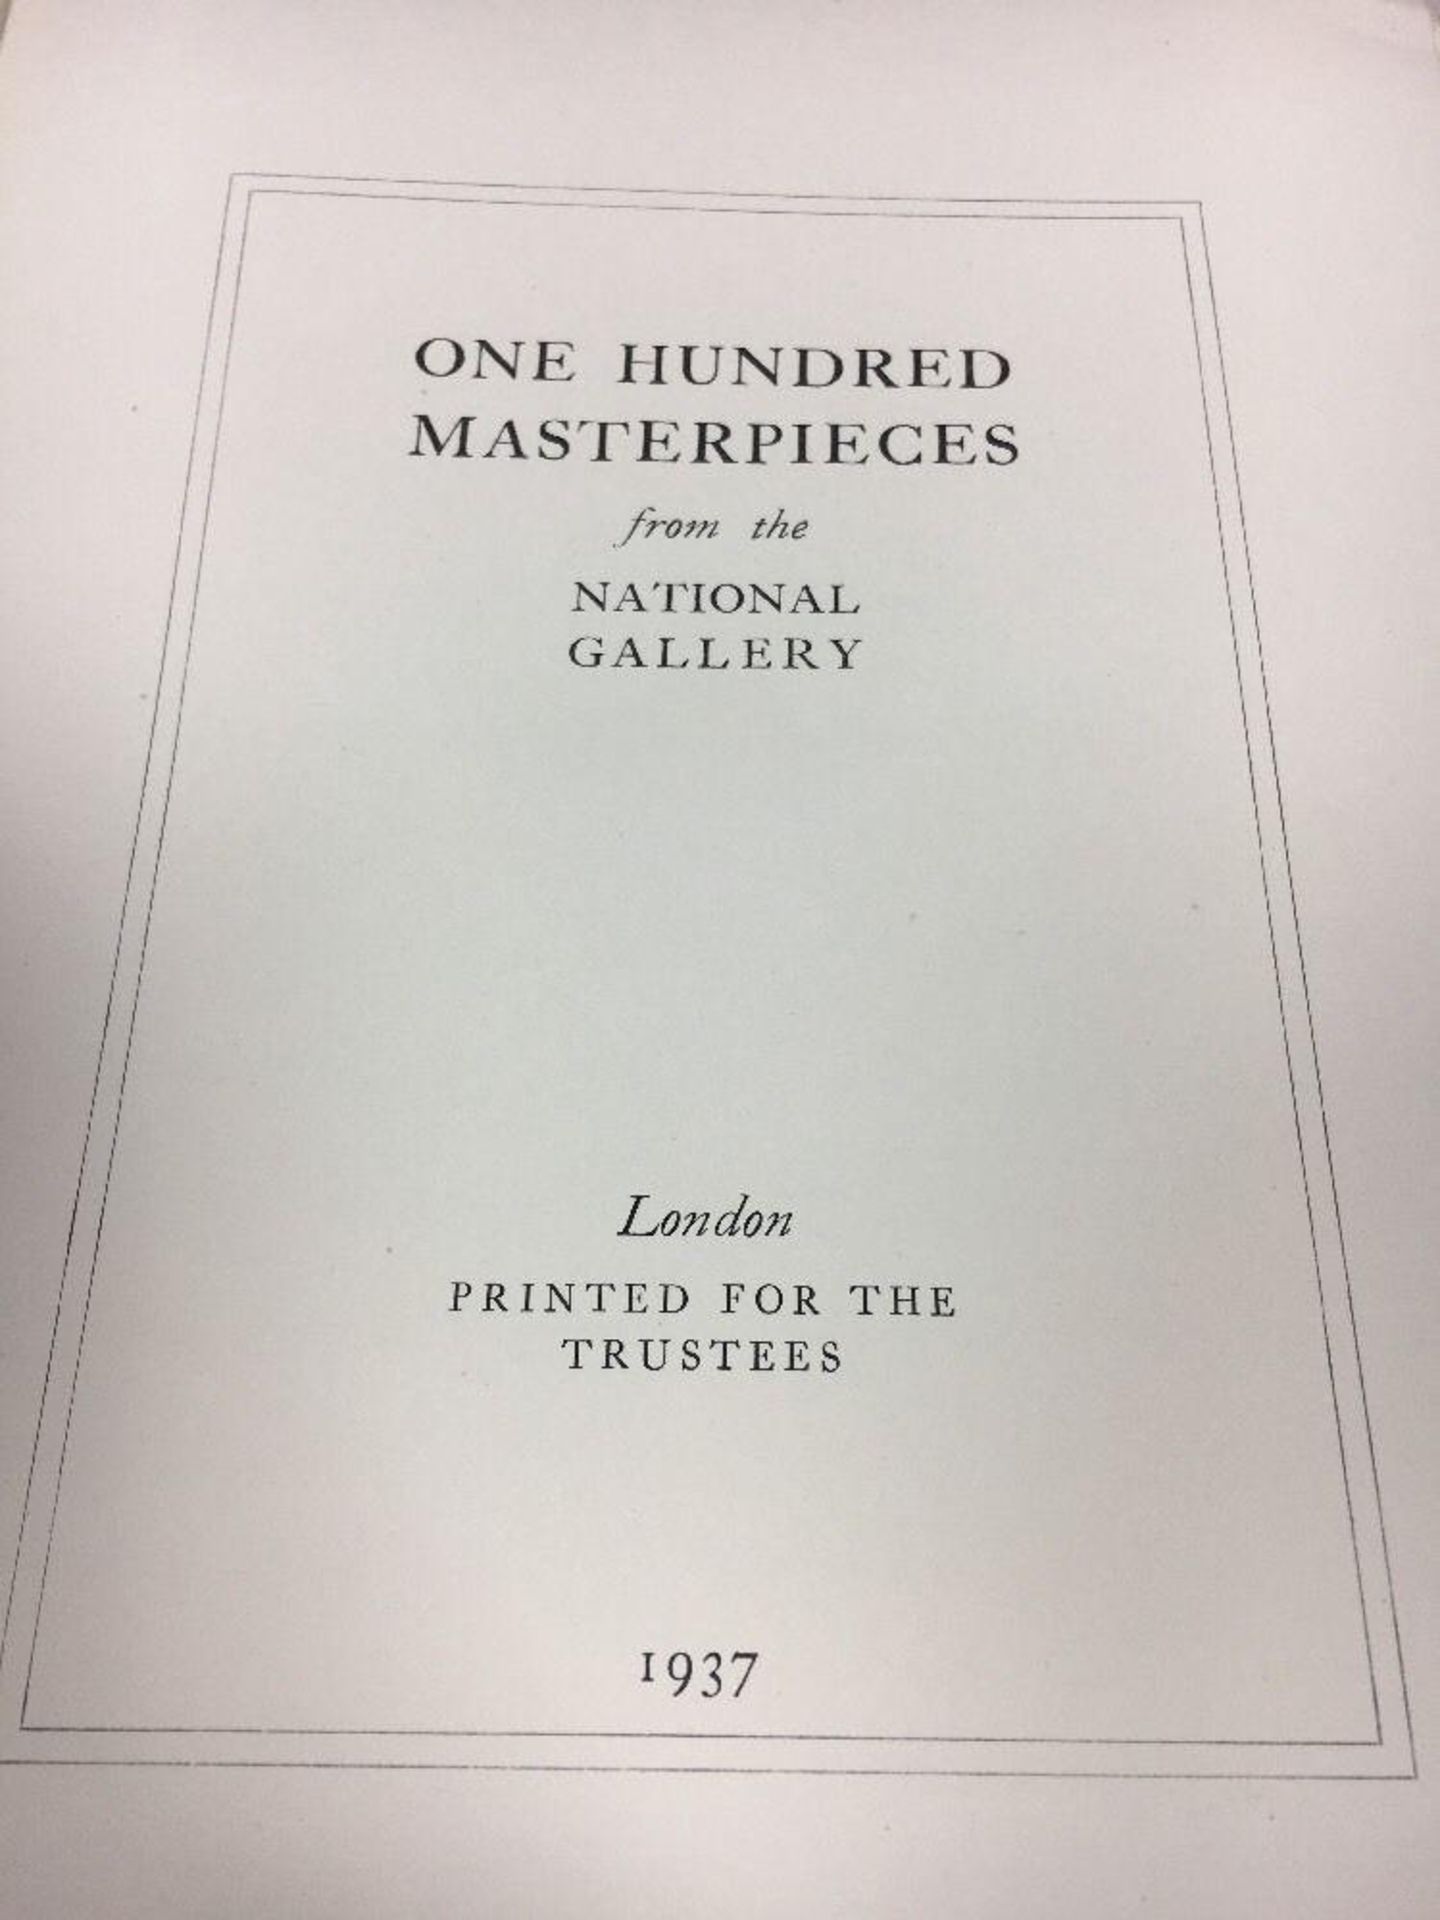 One Hundred Masterpieces from the National Gallery 1937 Vintage Book - Trustees - Image 2 of 3